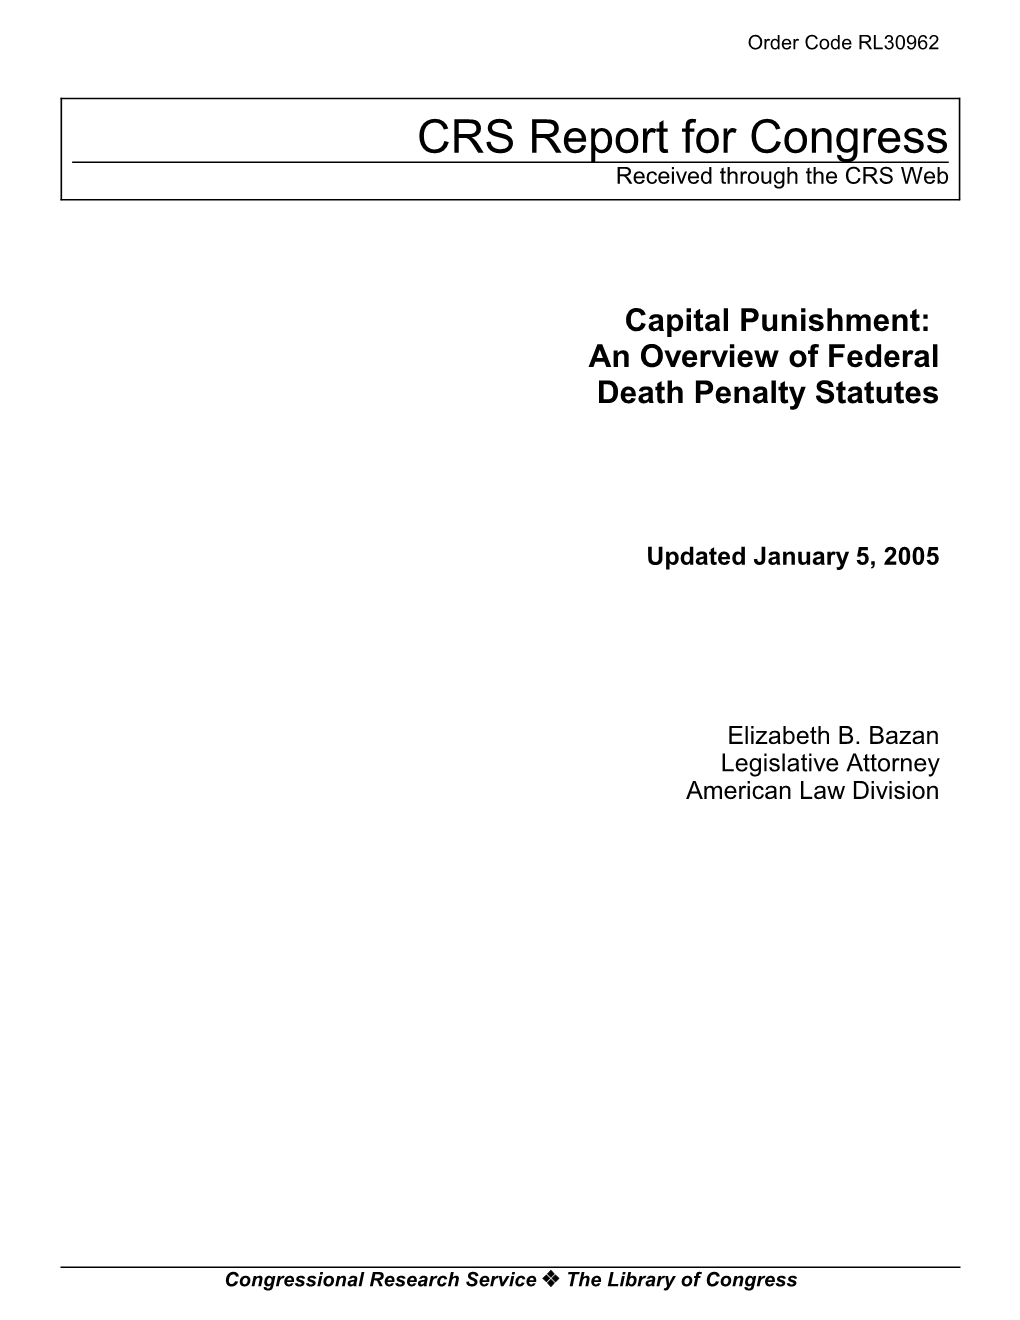 Capital Punishment: an Overview of Federal Death Penalty Statutes